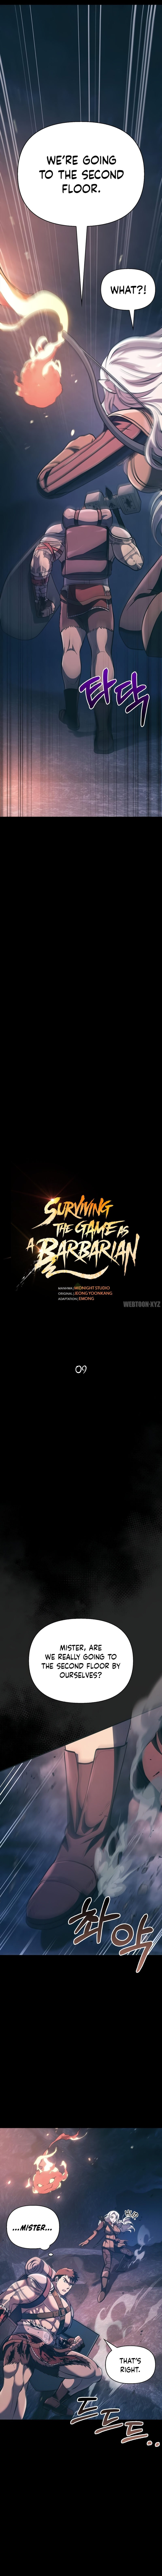 surviving-the-game-as-a-barbarian-chap-9-3